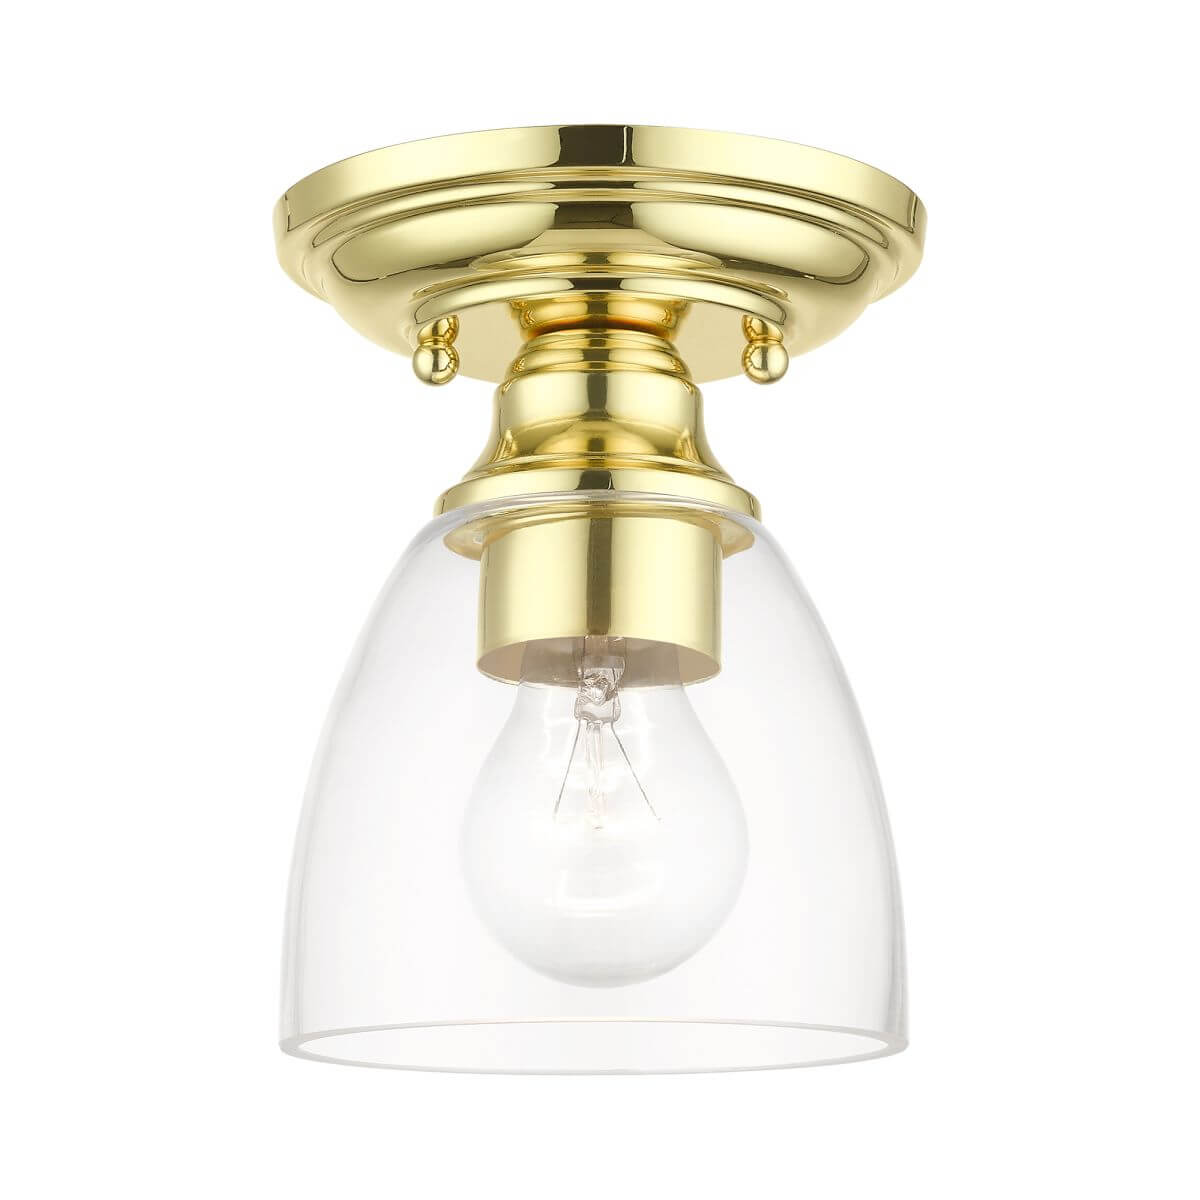 Livex 46331-02 Montgomery 1 Light 5 inch Petite Semi-Flush Mount in Polished Brass with Hand Blown Clear Glass